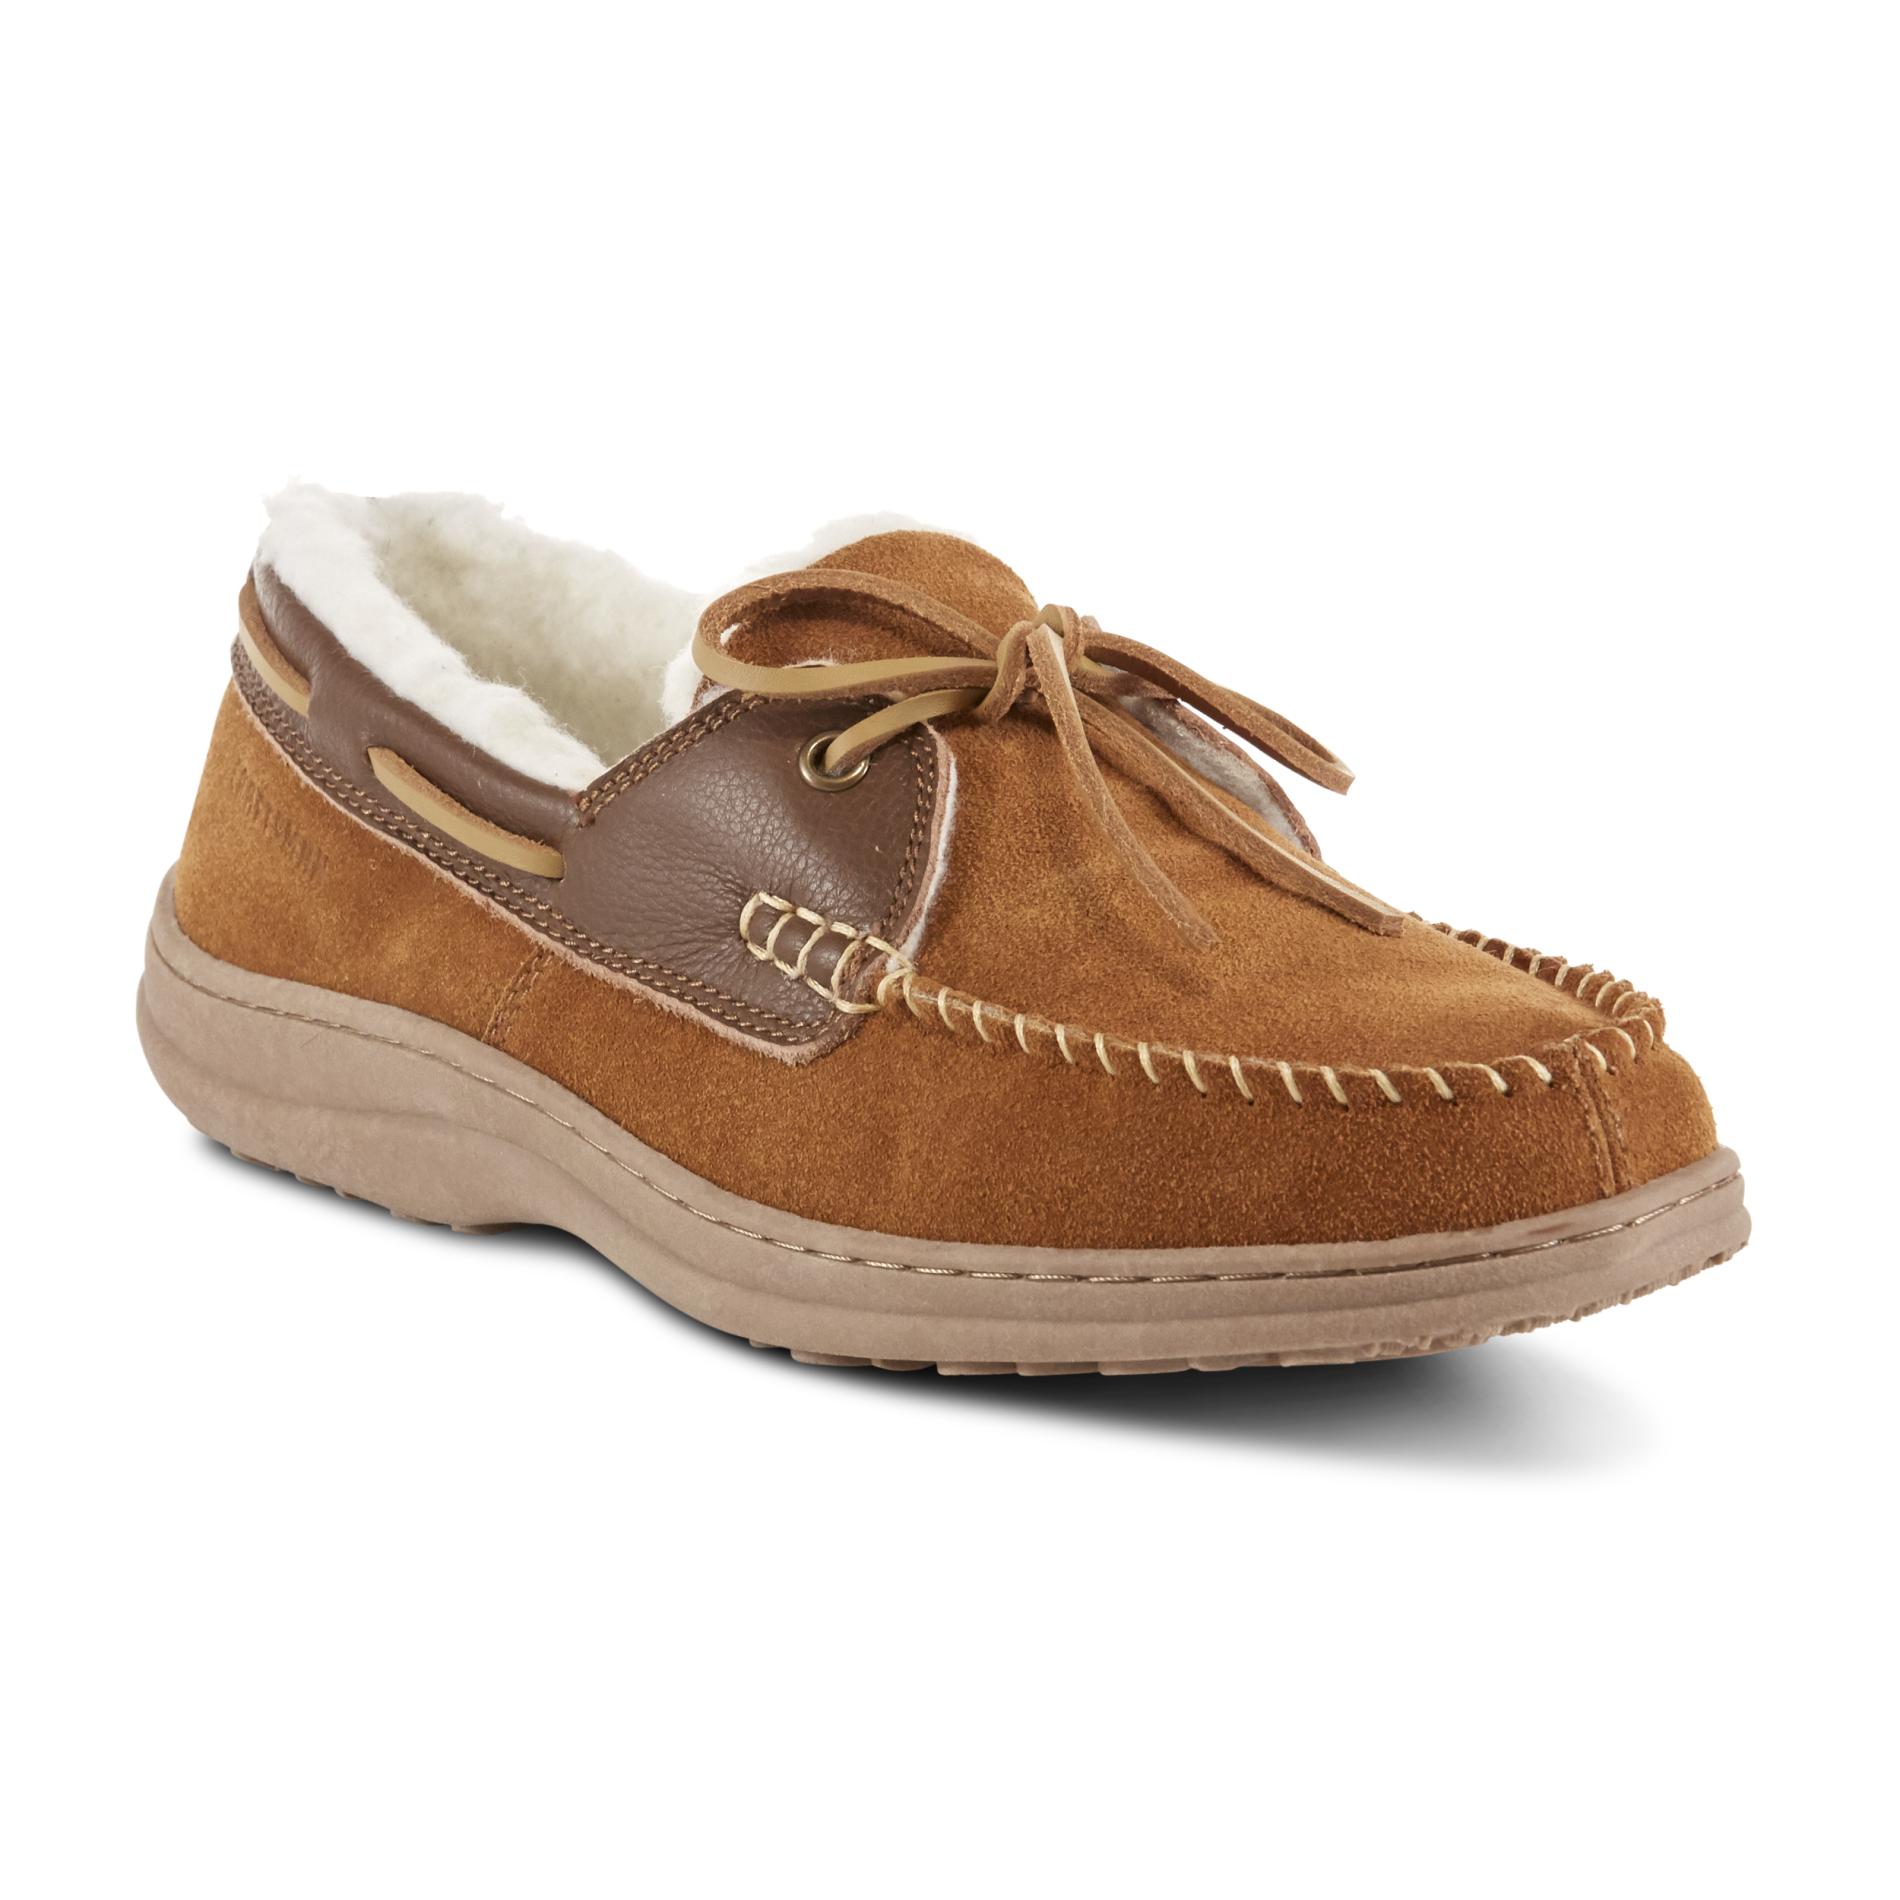 Thomas Moccasin Slipper - Brown - Sears